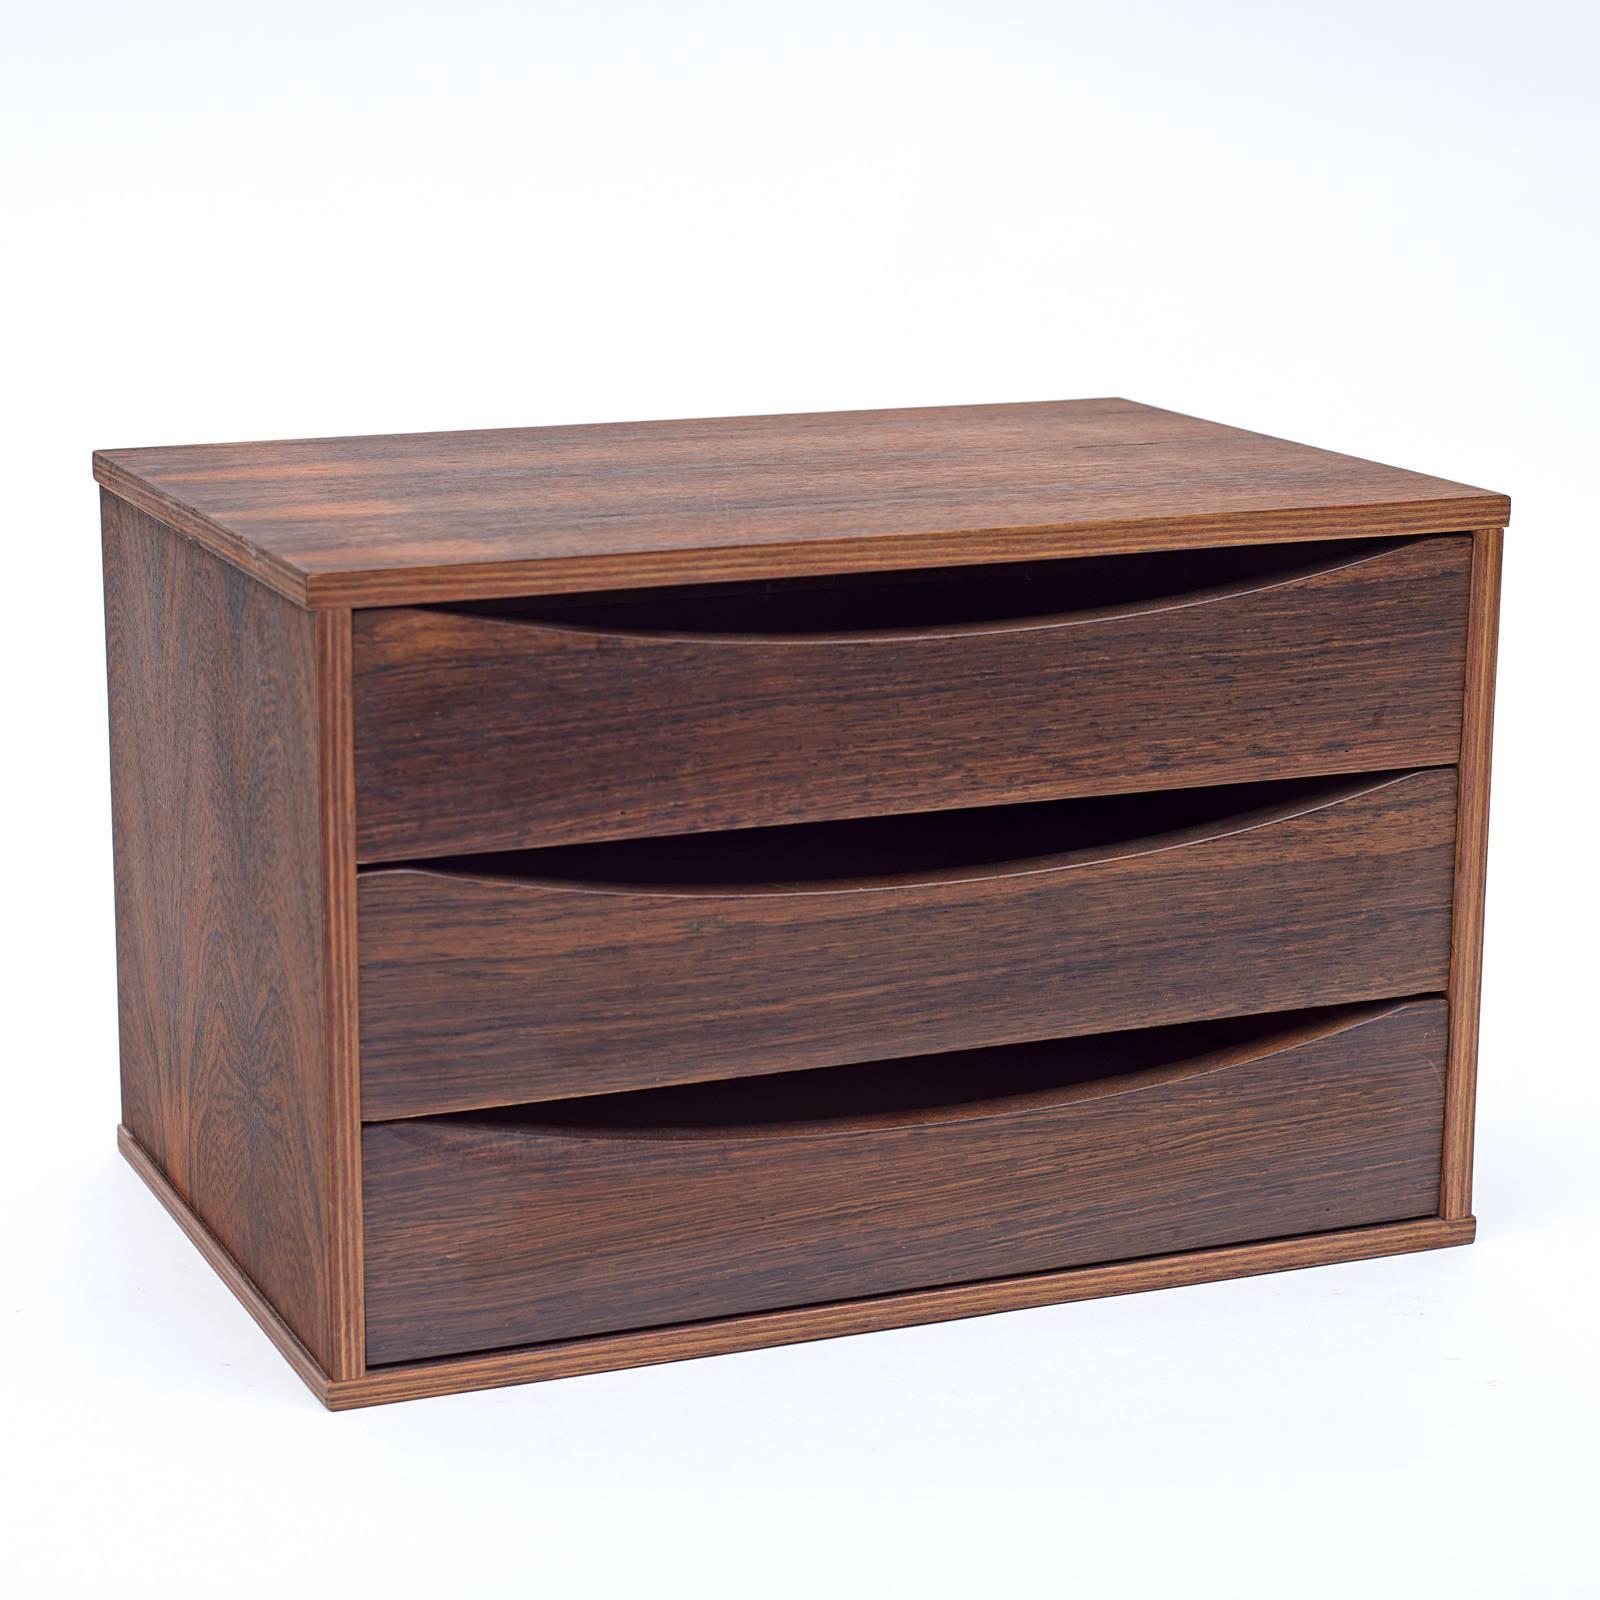 A practical and attractive small chest of drawers that could be used for a variety of purposes. Usually found in teak this is an outstanding rosewood version.